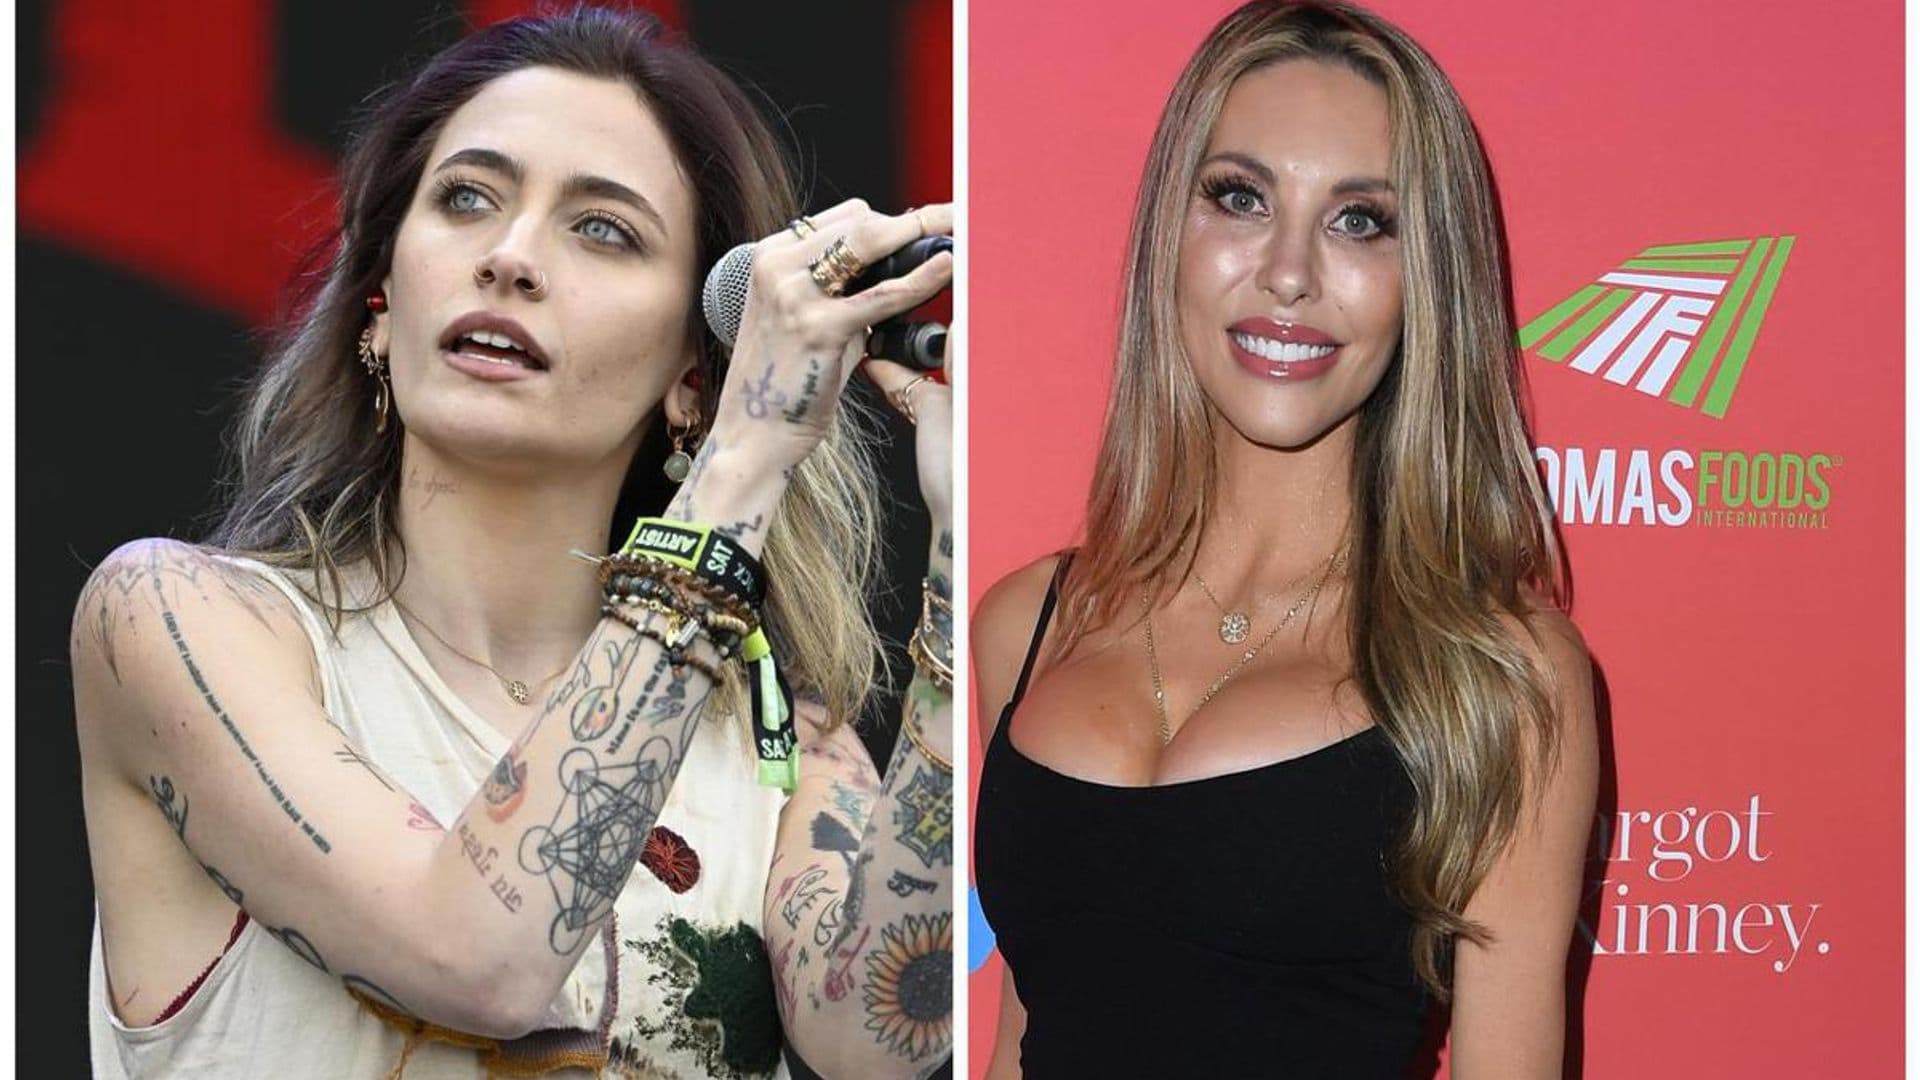 Paris Jackson and Chloe Lattanzi have become close friends despite their age difference